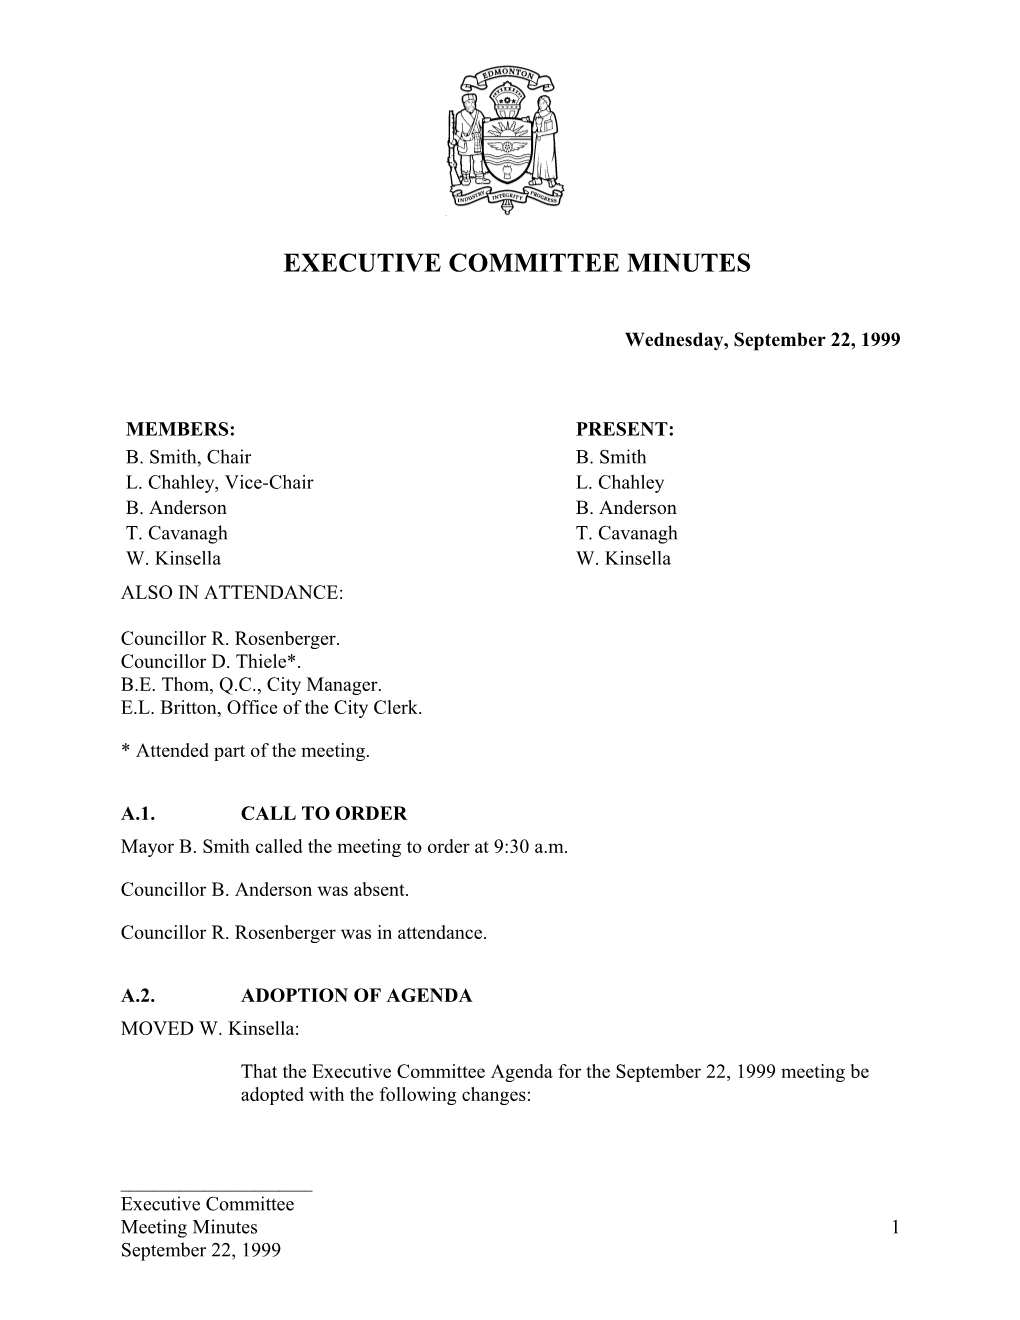 Minutes for Executive Committee September 22, 1999 Meeting